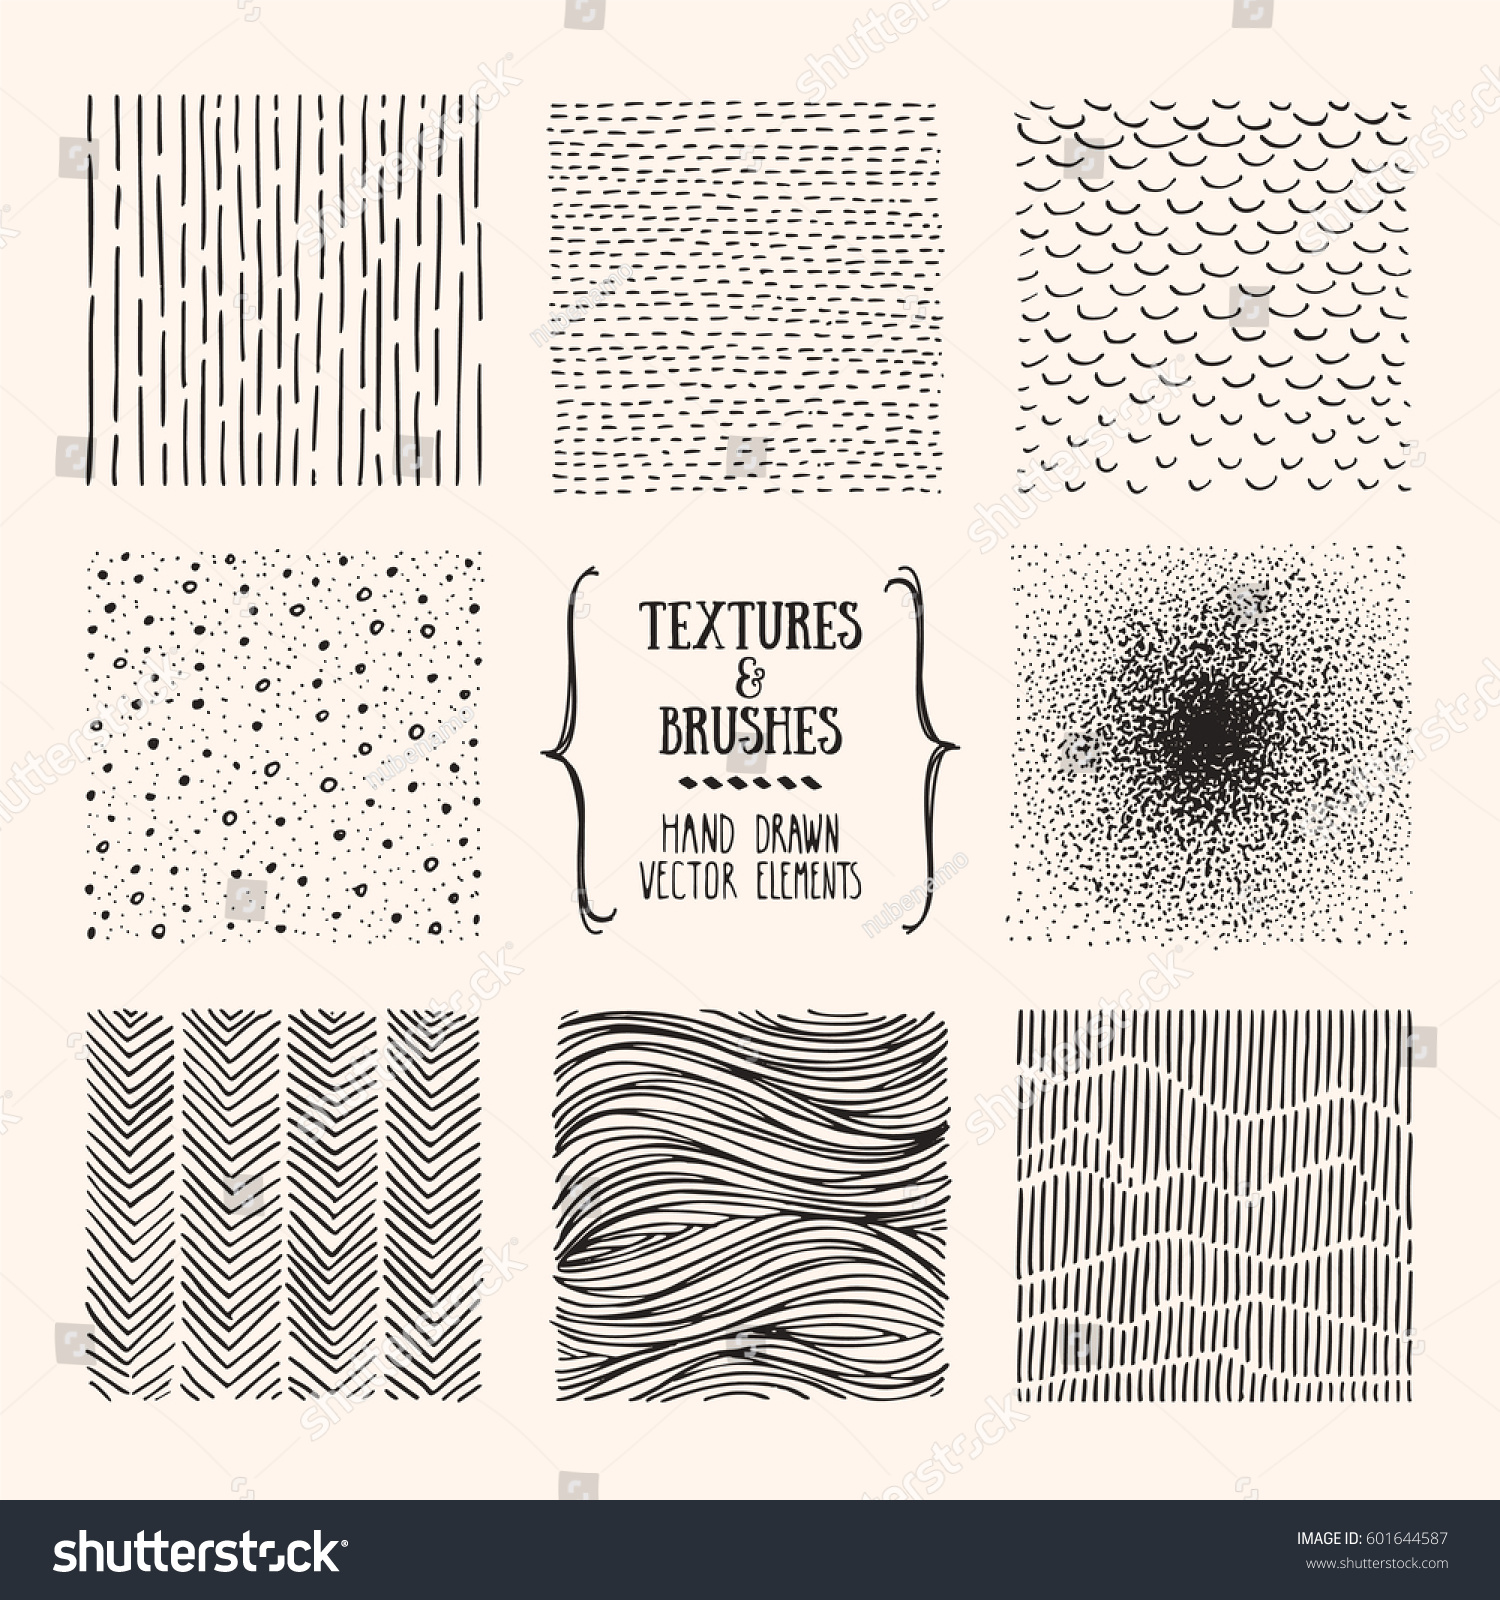 Hand Drawn Textures Brushes Artistic Collection Stock Vector (Royalty ...